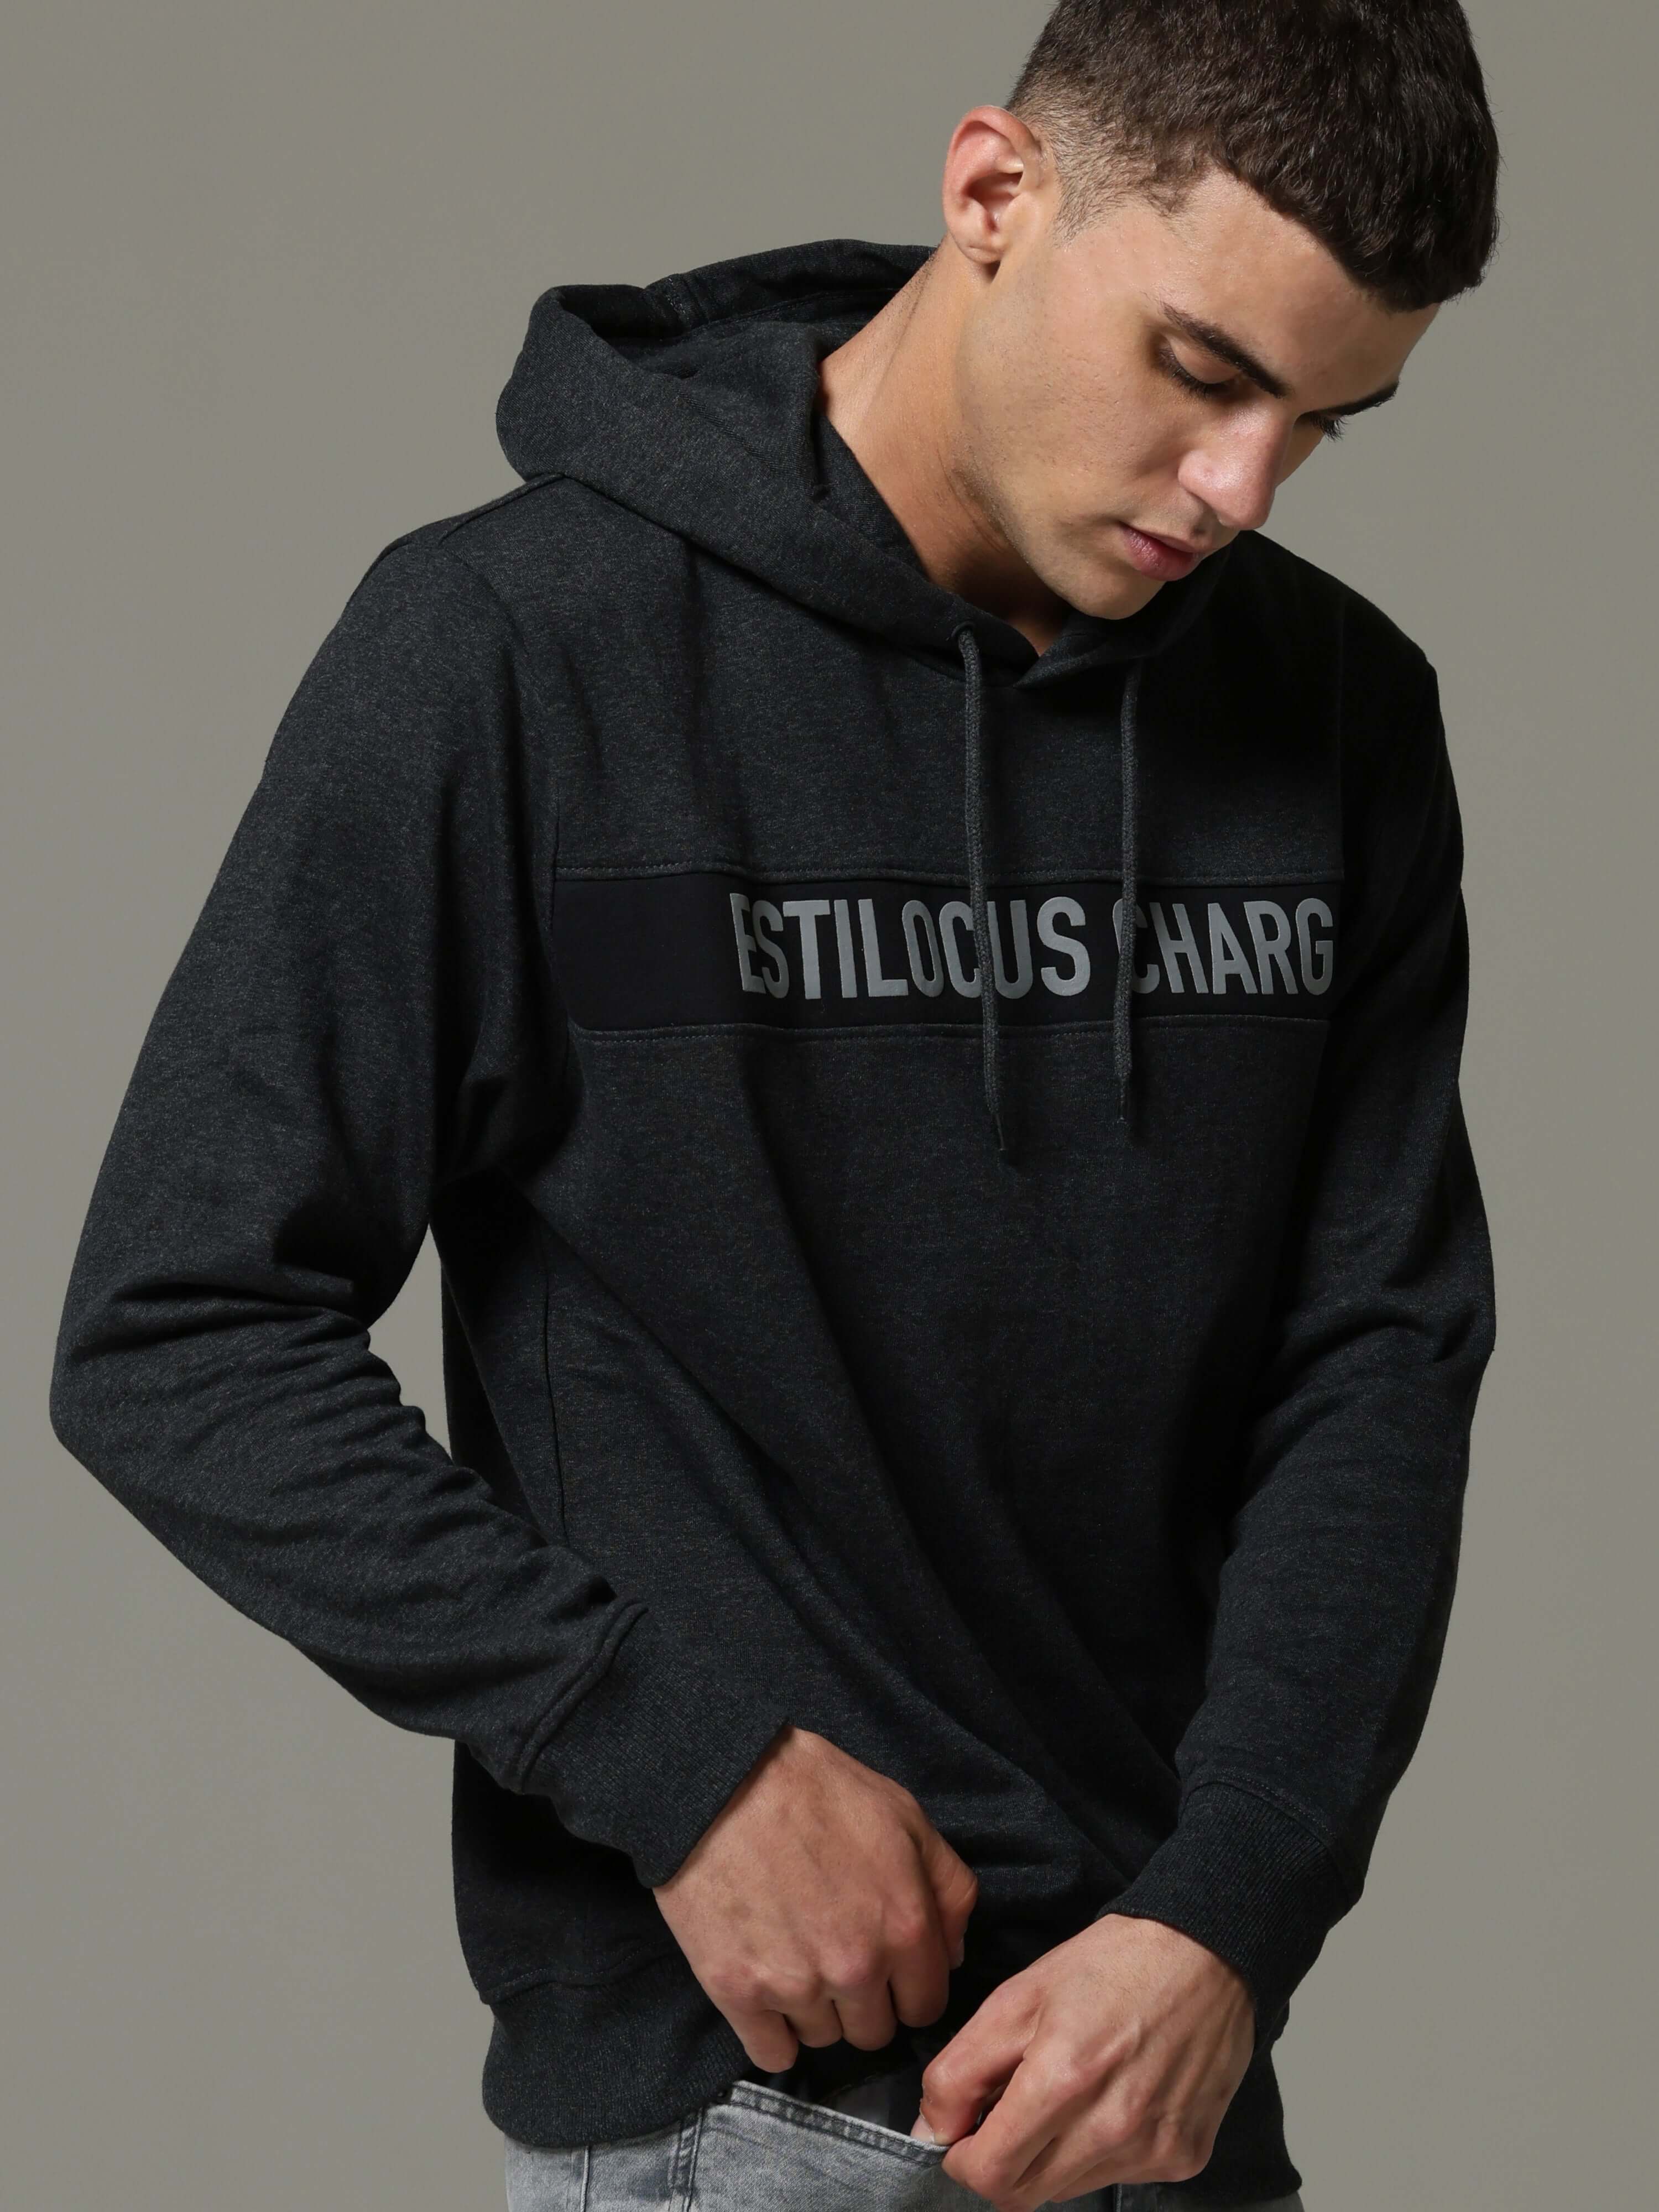 Dark Gray Charg Hoodie shop online at Estilocus. • Crew neck with an attached hood • Adjustable hood with drawcord •A regular fit with long sleeves •Zipper and pocketless • Dress it up with a pair of Denim or Joggers Fit : Comfort fit Size : The model is